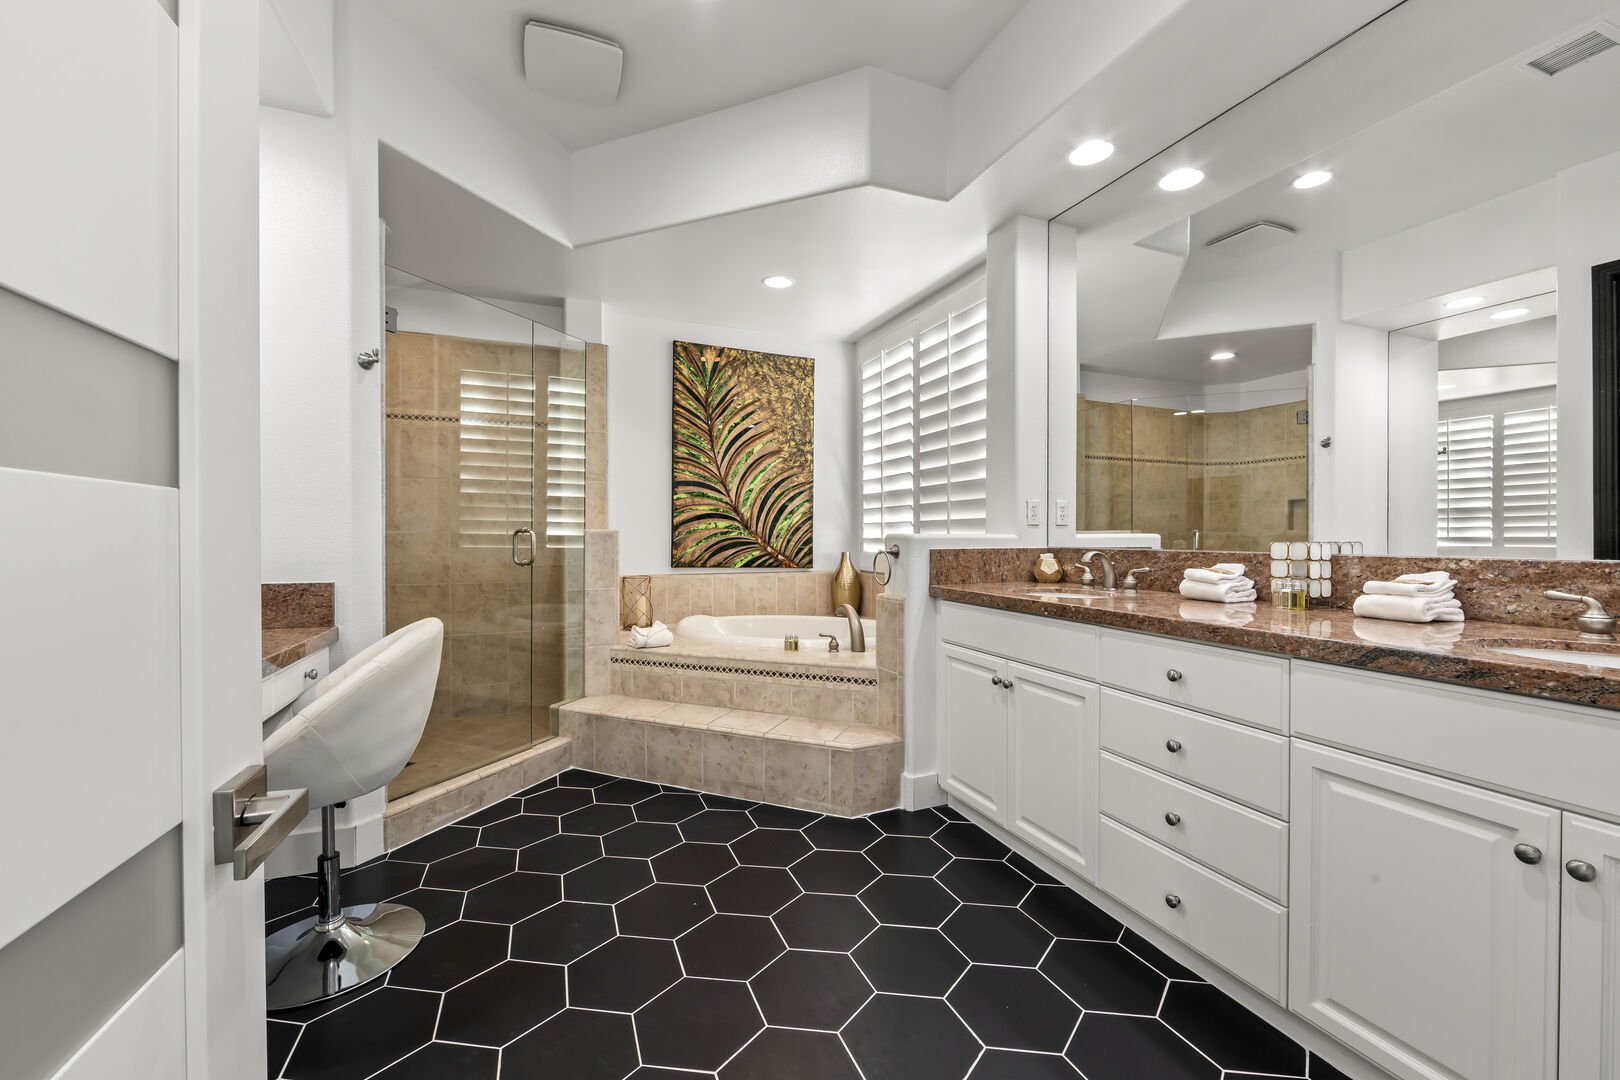 The Master Suite bathroom features a soaking tub, a tile shower with a built-in raised bench, double vanity sinks, and makeup counter.